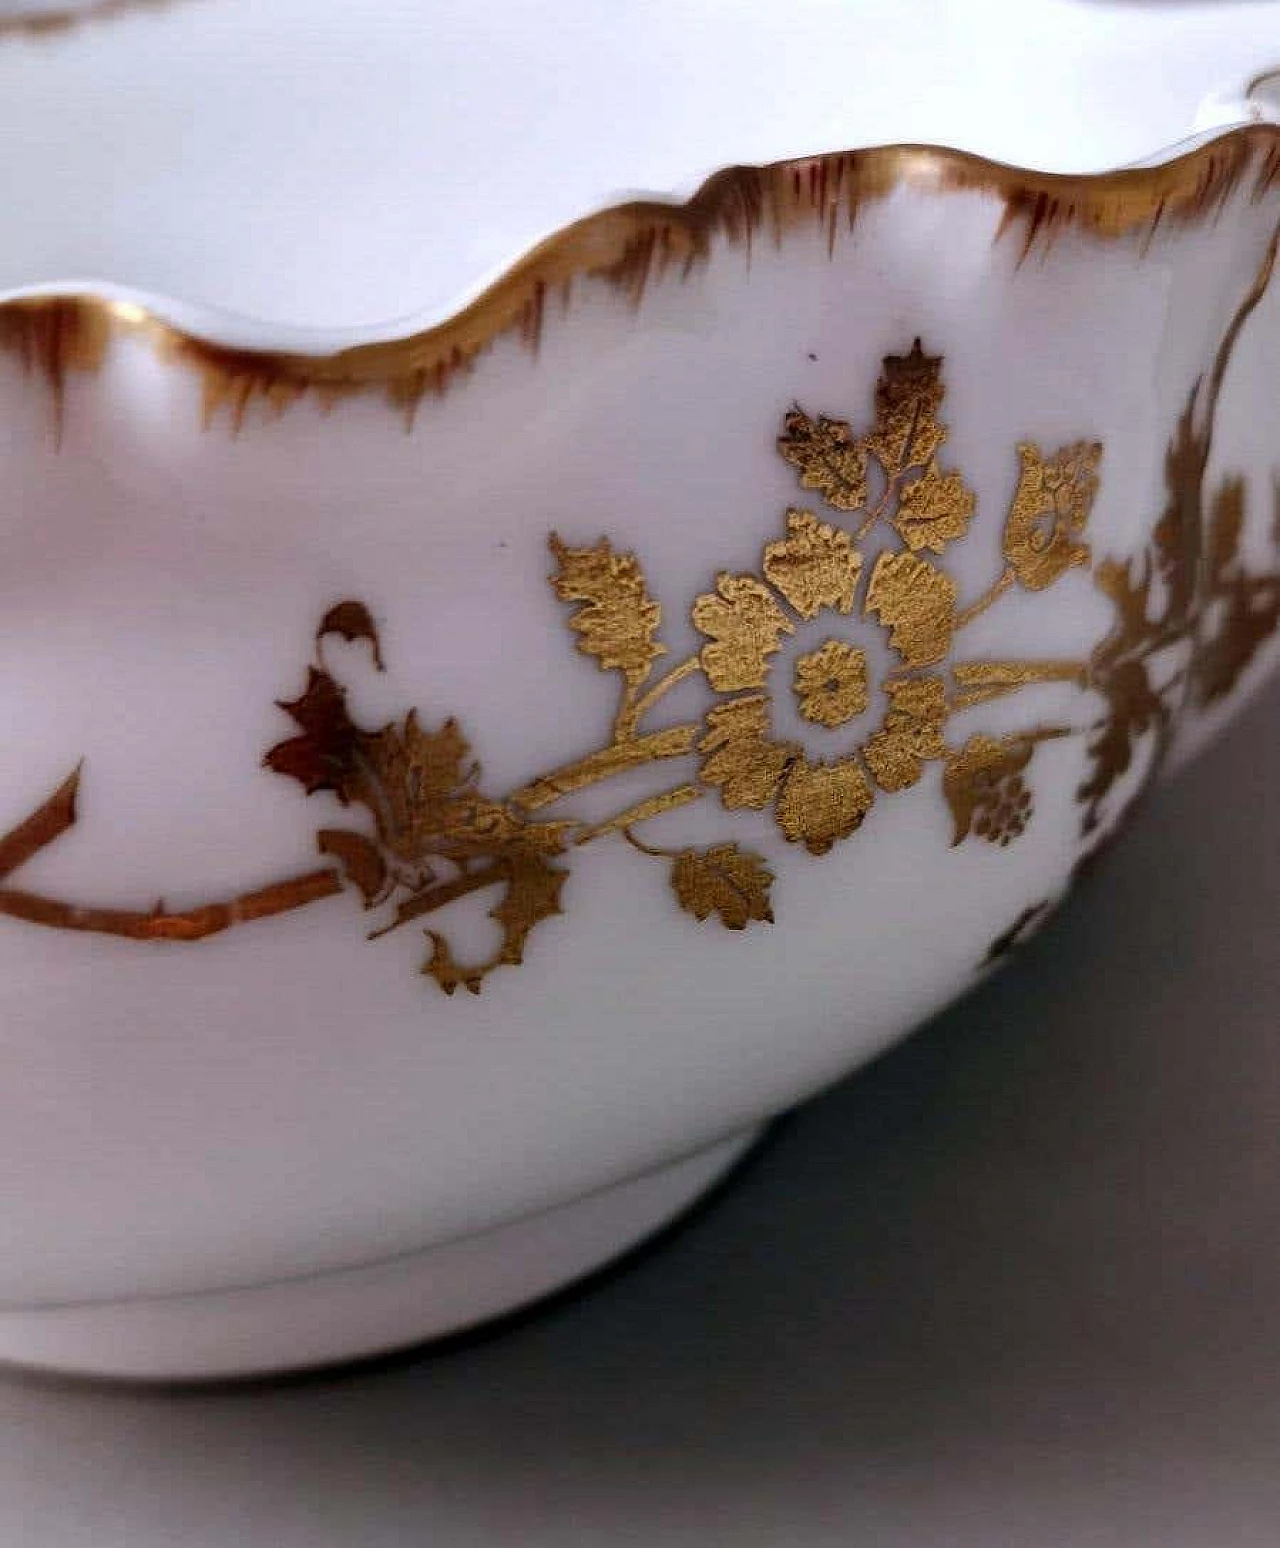 Salad bowl with tray in Limoges porcelain by Haviland & Co., early 20th century 13